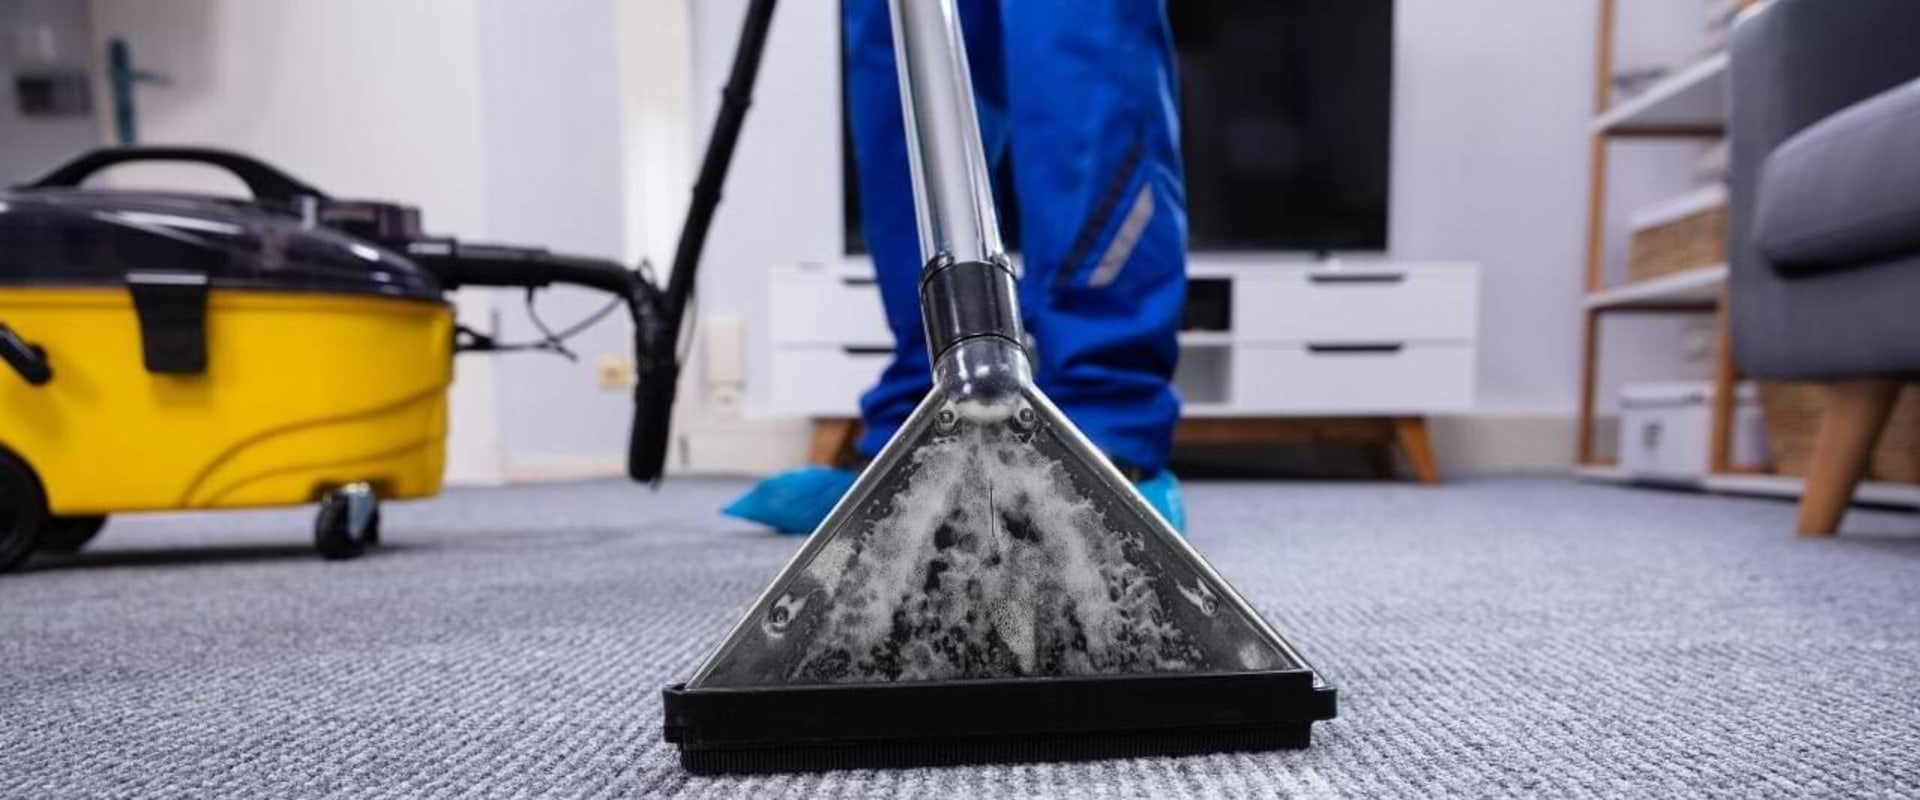 What Type of Cleaning Products Should You Use for Carpet Cleaning? - A Comprehensive Guide